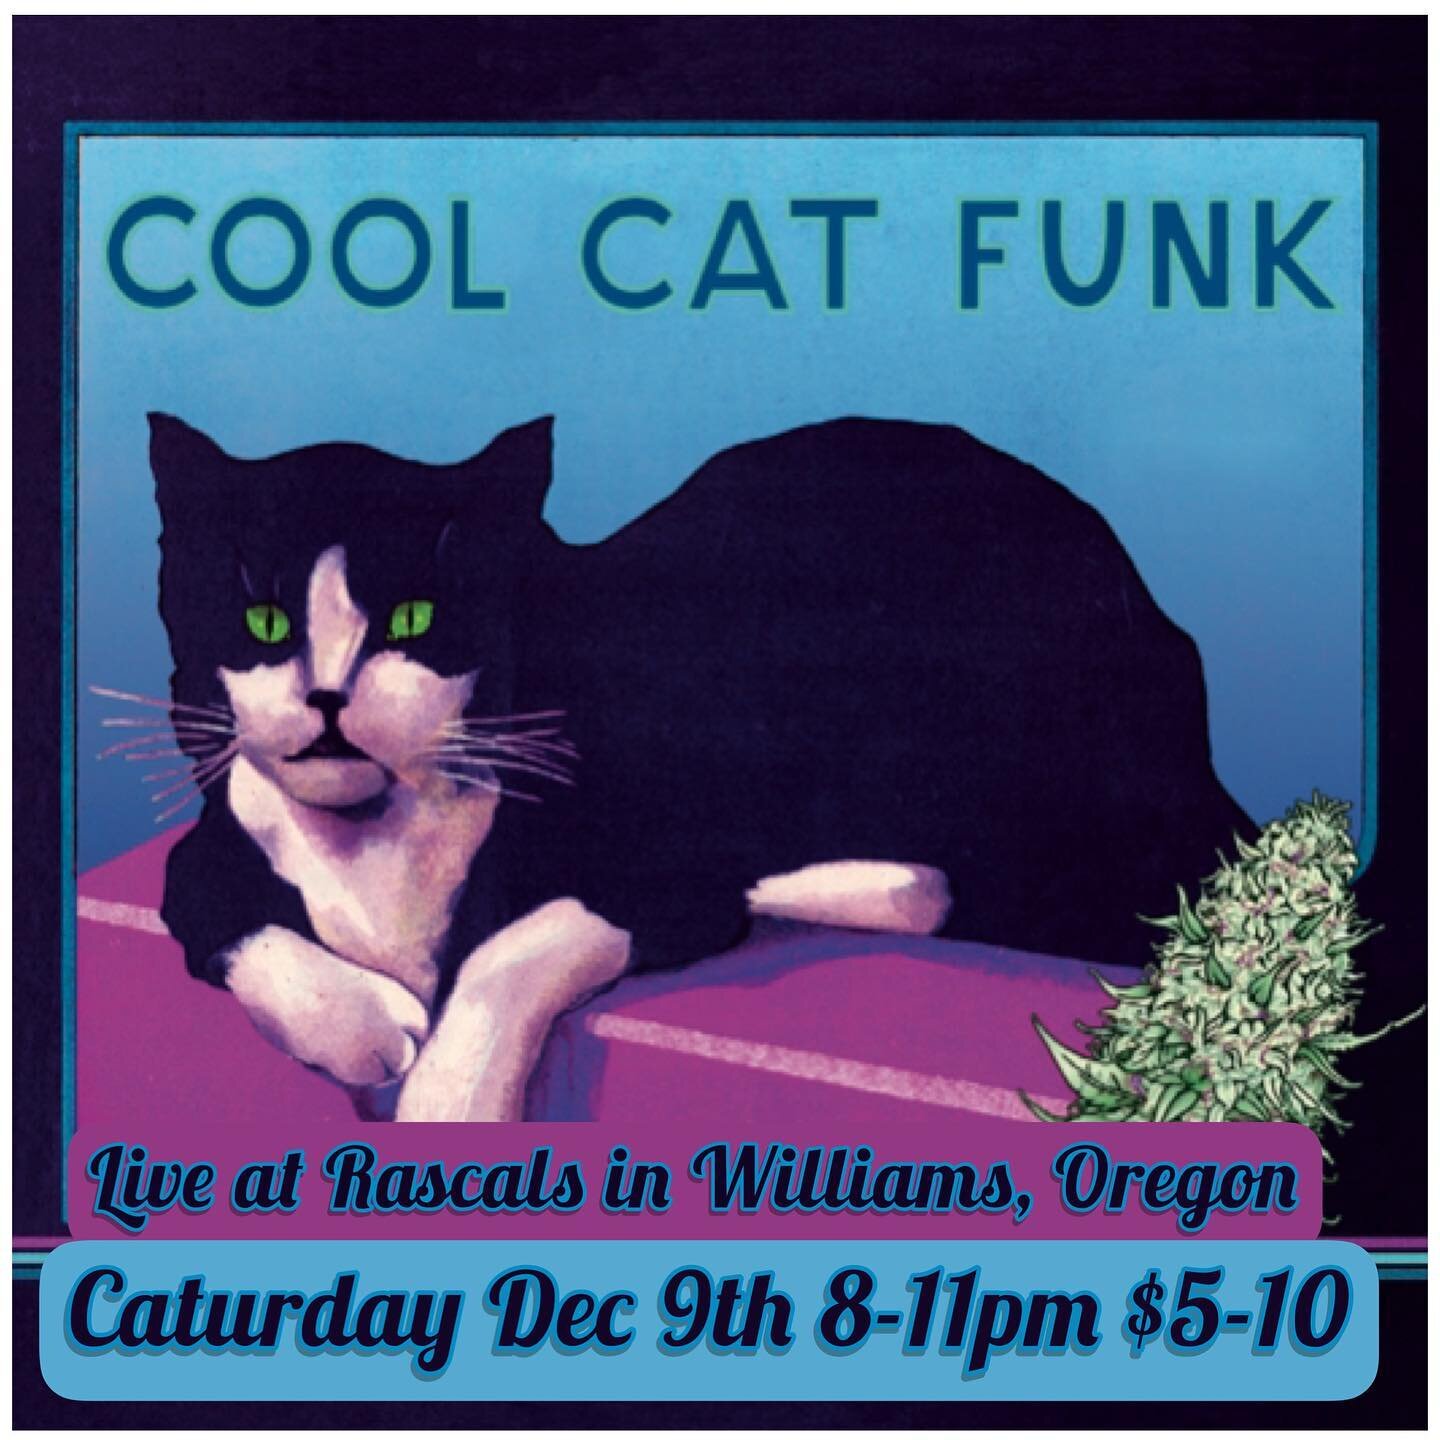 Hey all you Cool Cats,  We&rsquo;re playing Live and weed love to see your beautifull faces , Caturday December 9th at Rascals in Williams.  8pm 
⚡️🍻🤙🏽🐅🦋🏝️🪶

#williamsoregon 
#southernoregon 
#applegatevalley 
#grantspass 
#420 
#originalmusic